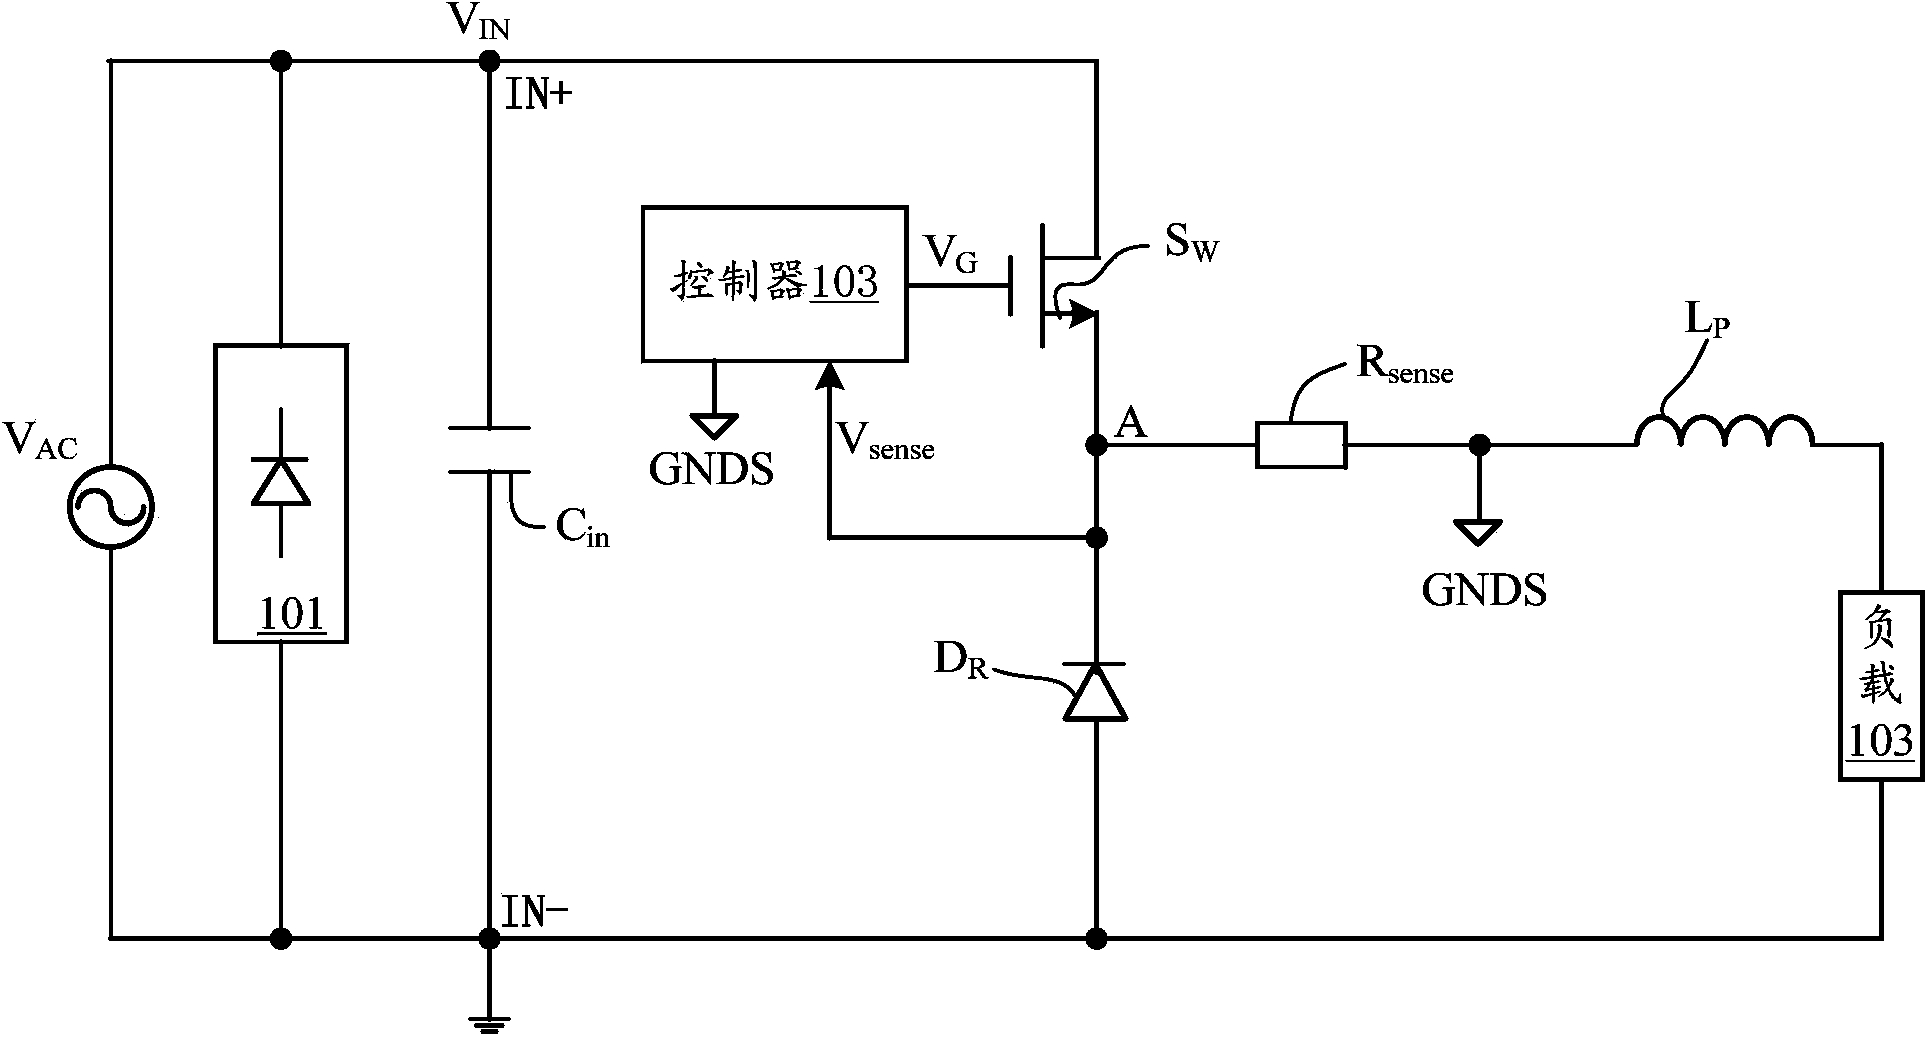 Chip packaging structure used for power converter